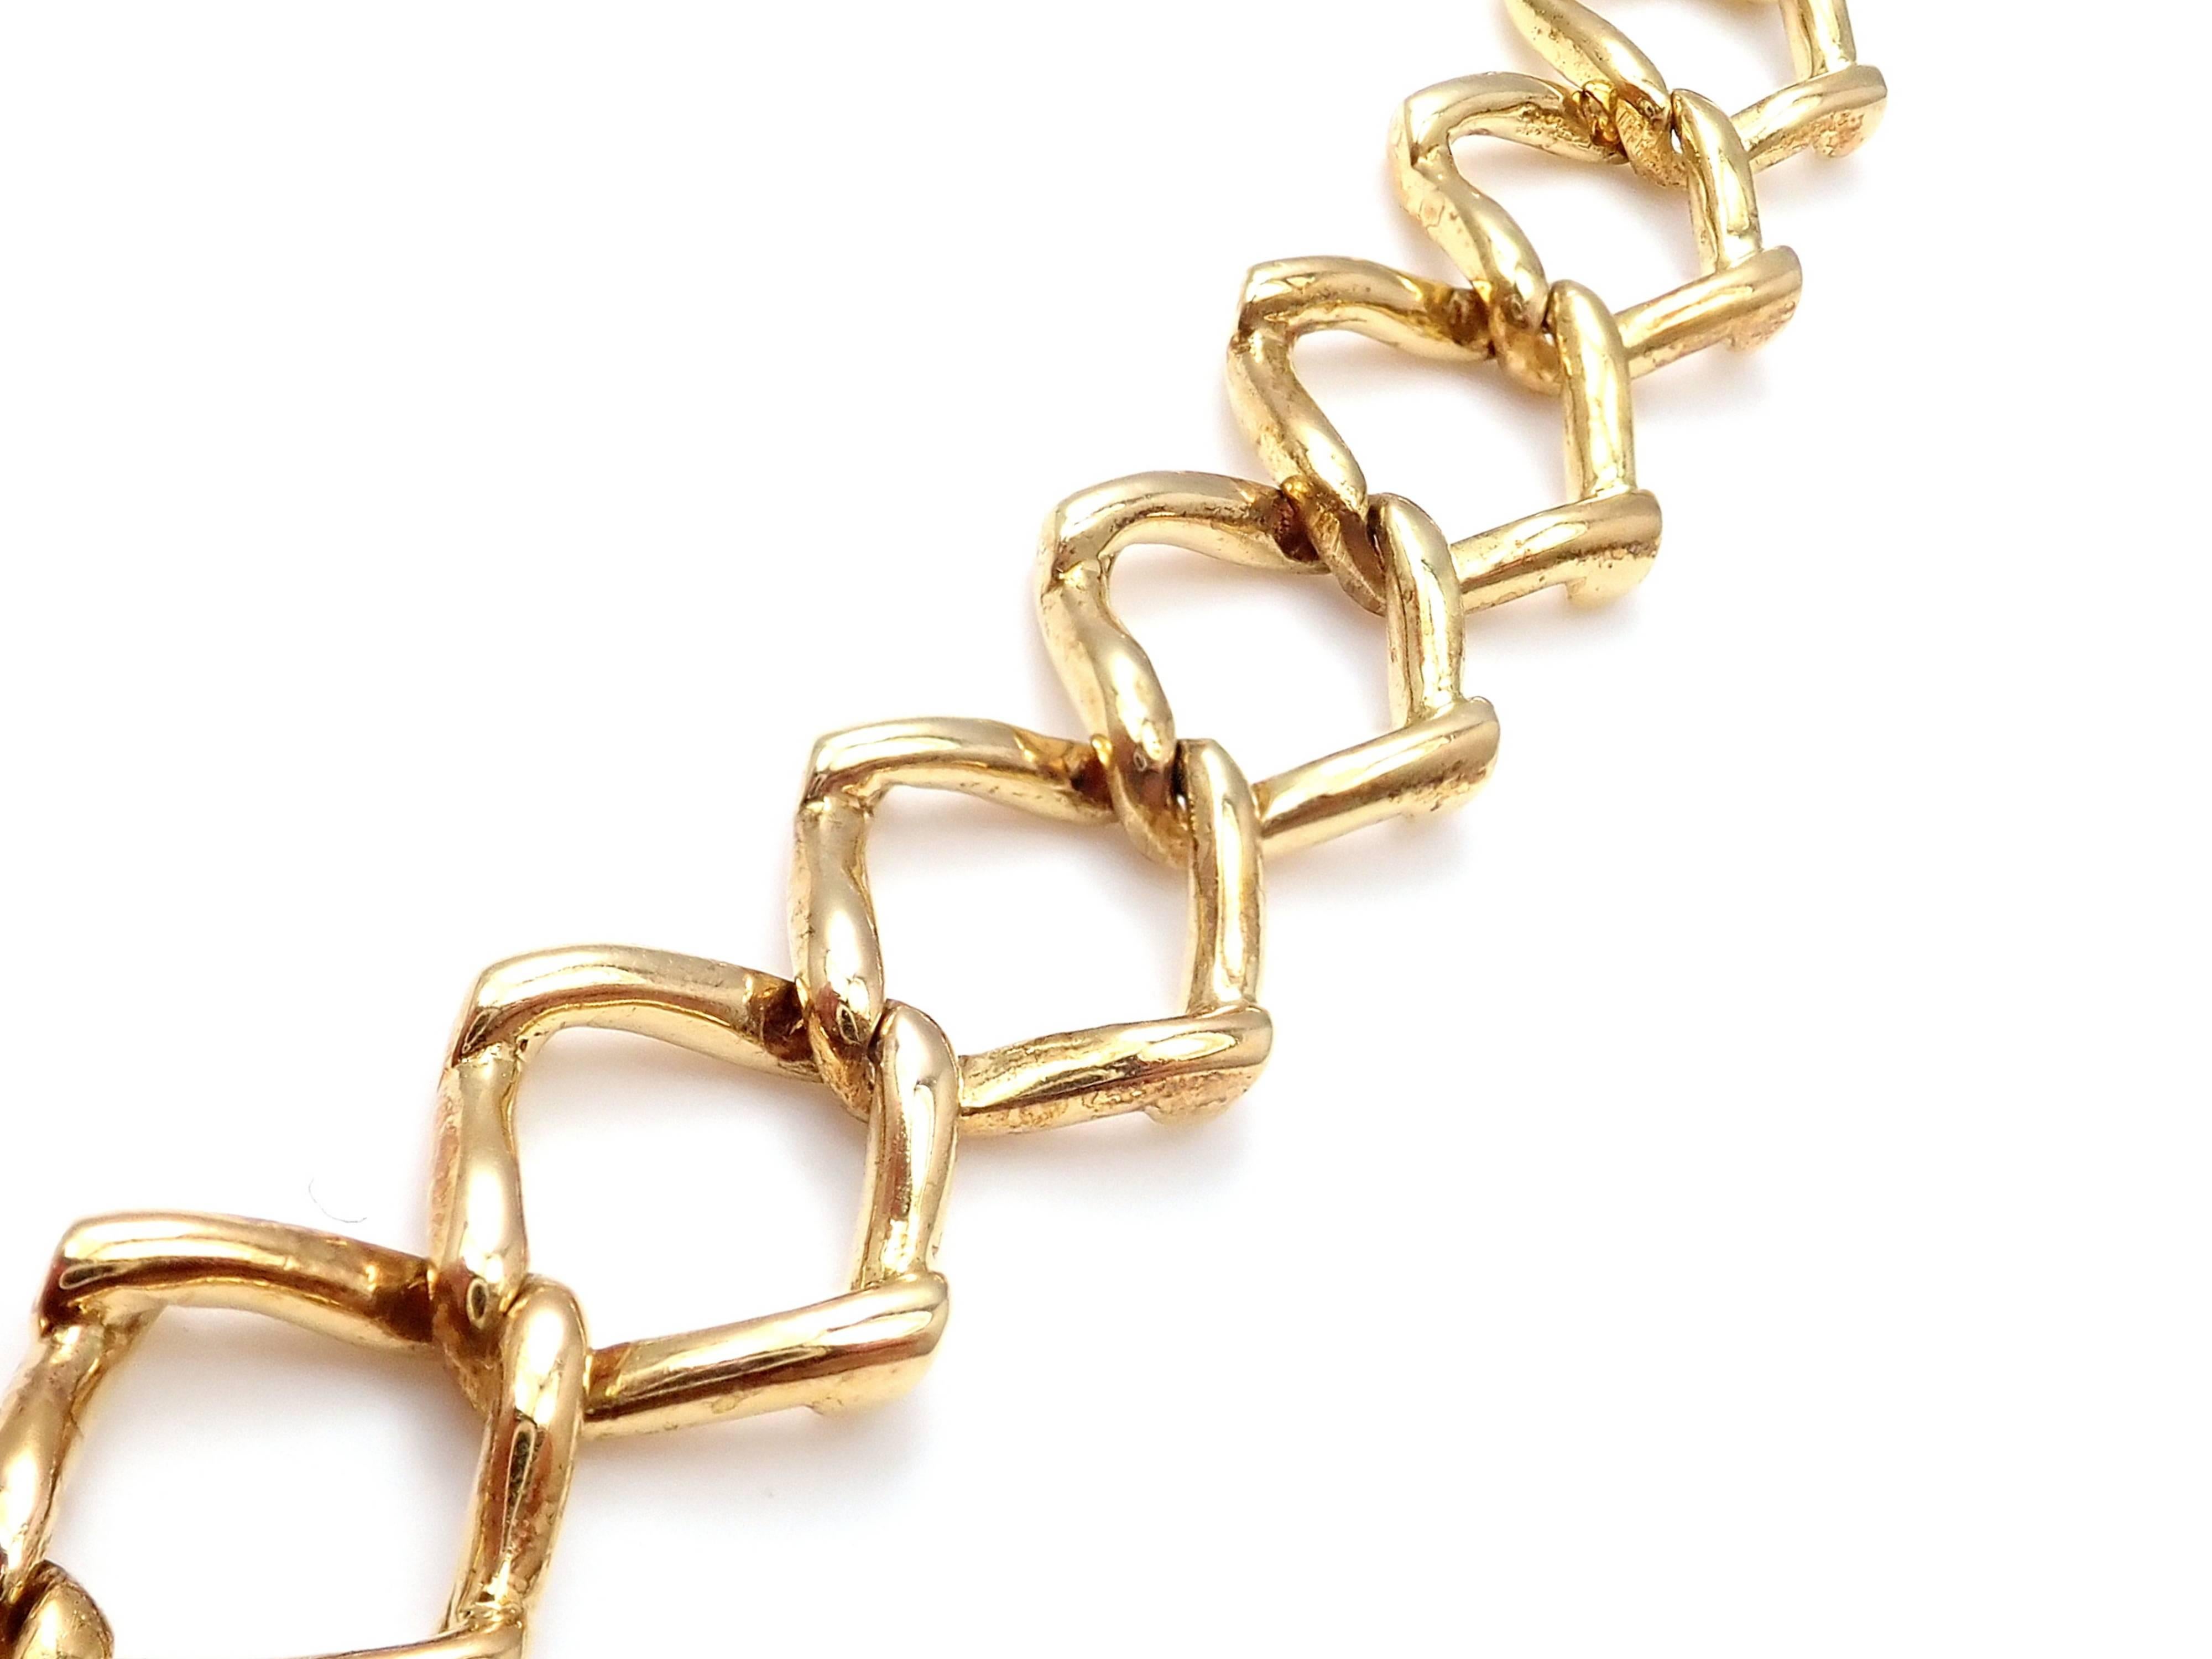 18k Yellow Gold And Platinum Diamond Link Necklace by Paloma Picasso for Tiffany & Co.  
With 12 Round brilliant cut diamonds, VS1 clarity, G color total weight  approx. .20ct
Details:  
Length: 15.25